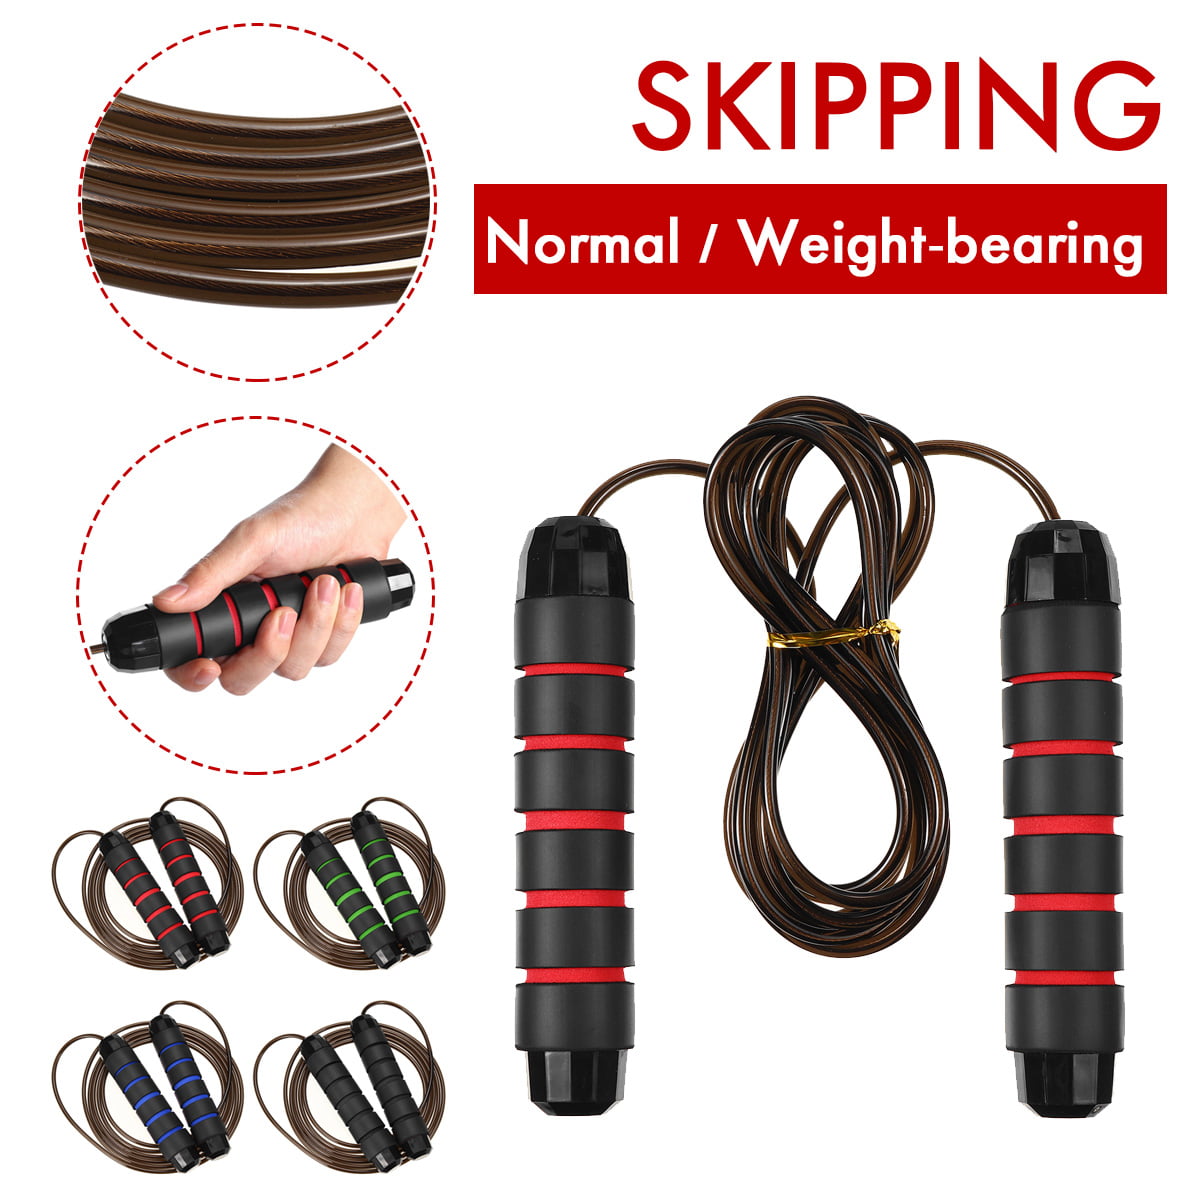 Adjustable Speed Skipping Rope Bearing Jump Crossfit Weight Loss Exercise Set 